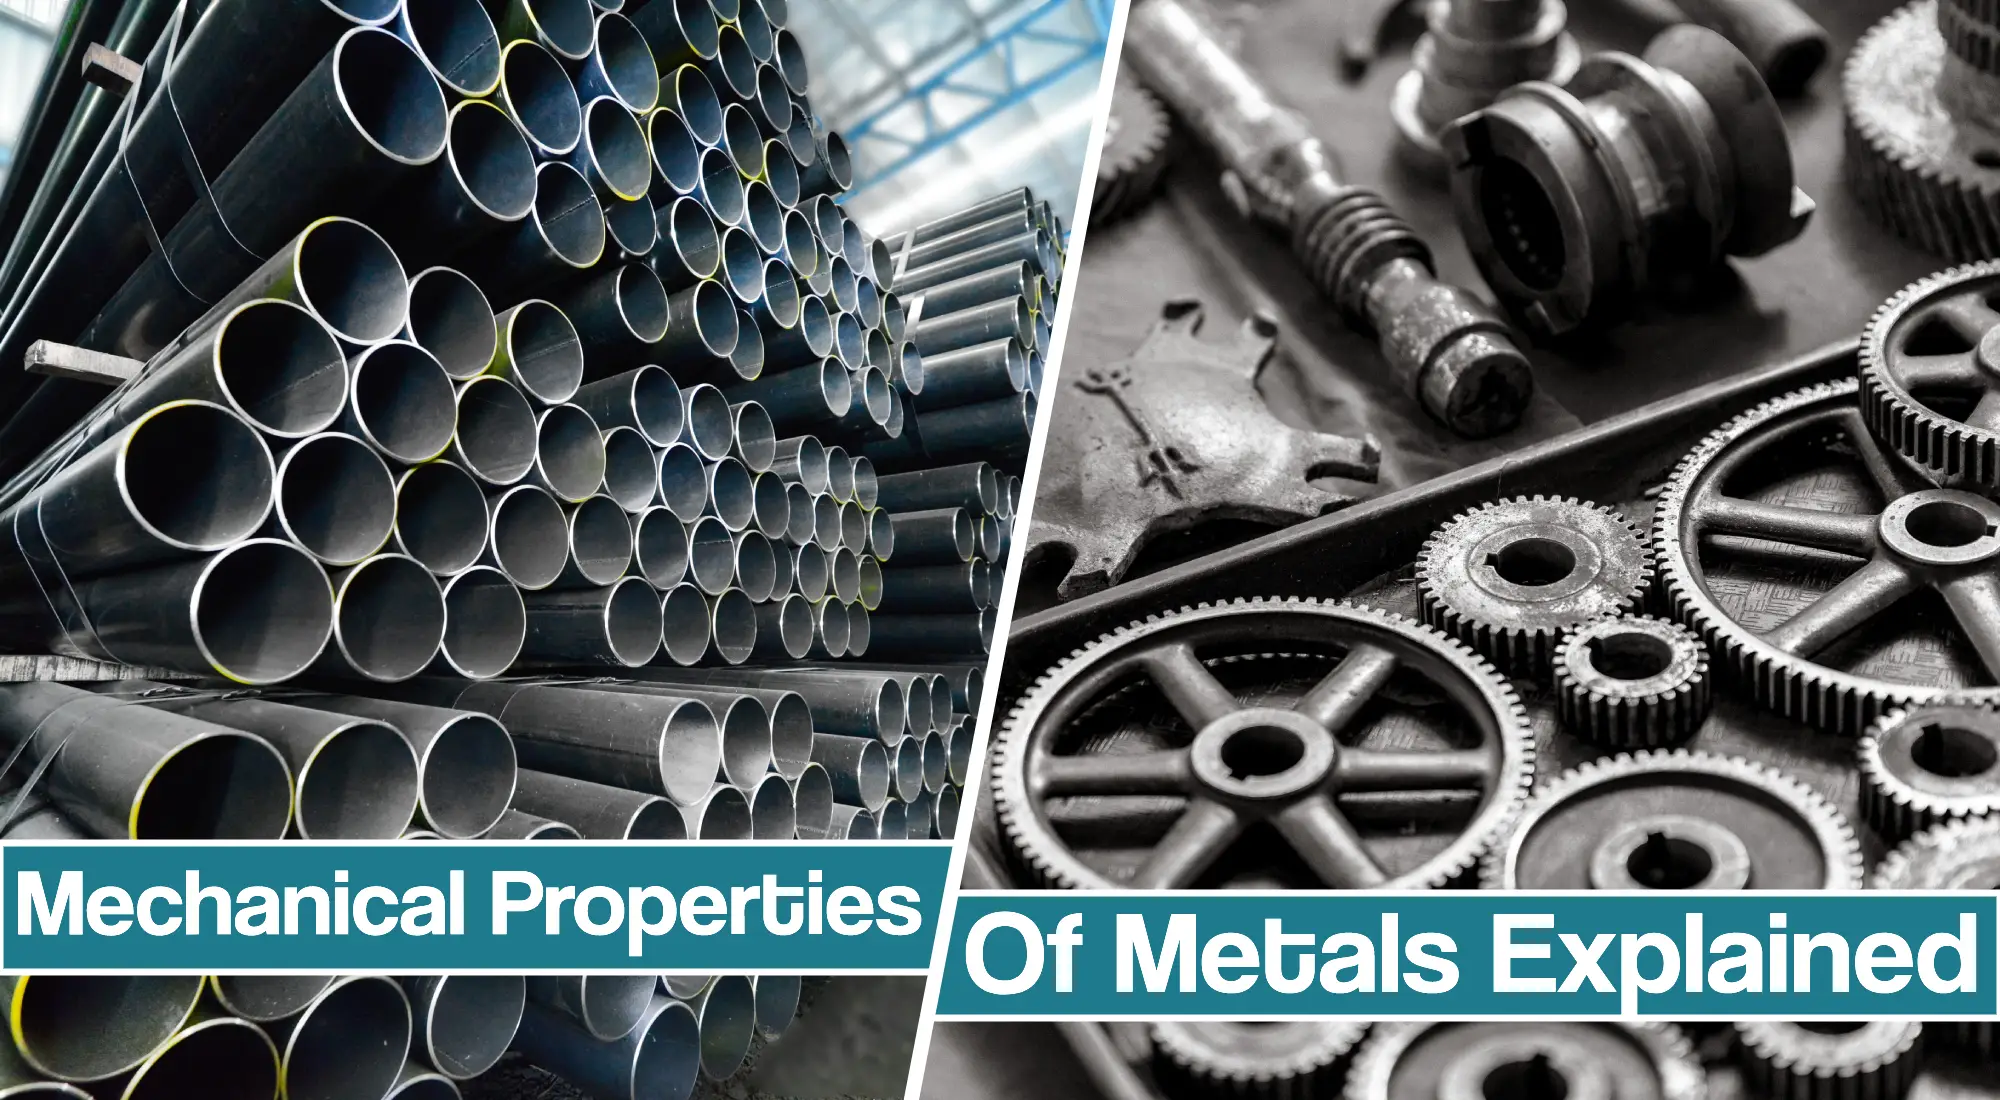 Featured image for the Mechanical Properties Of Metals article